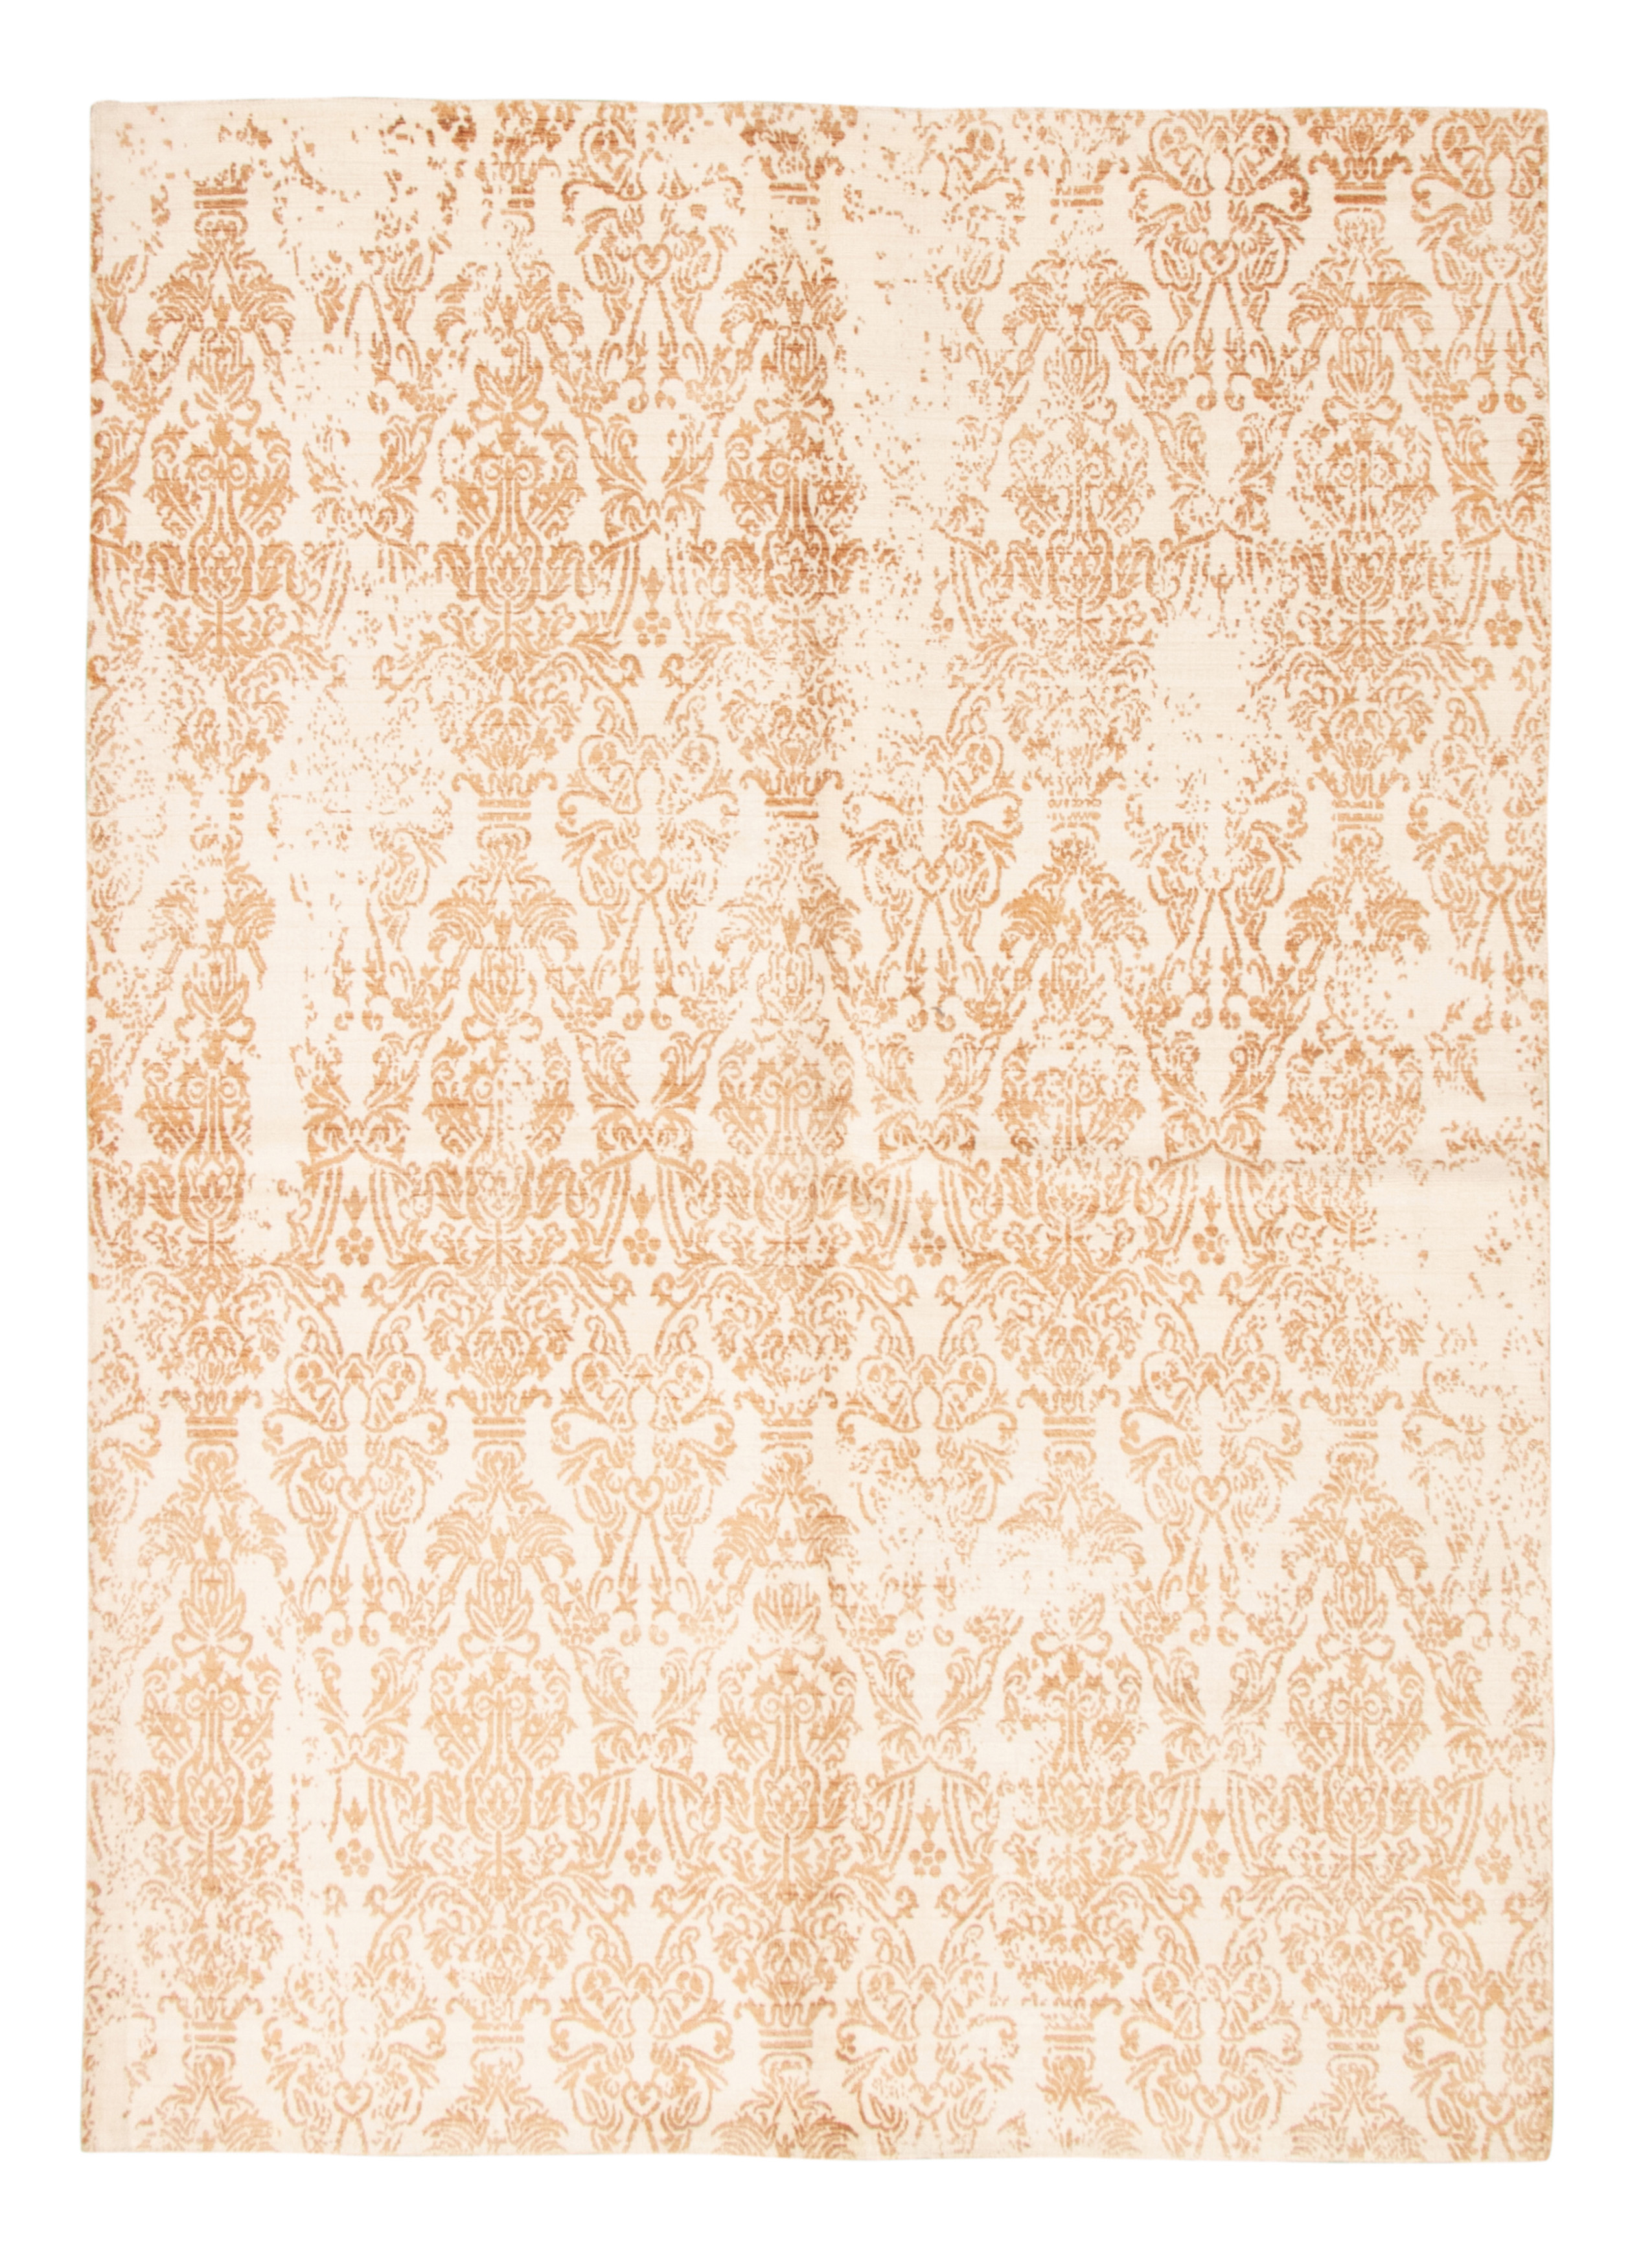 Hand loomed Galleria Ivory Viscose Rug 5'5" x 7'9" Size: 5'5" x 7'9"  